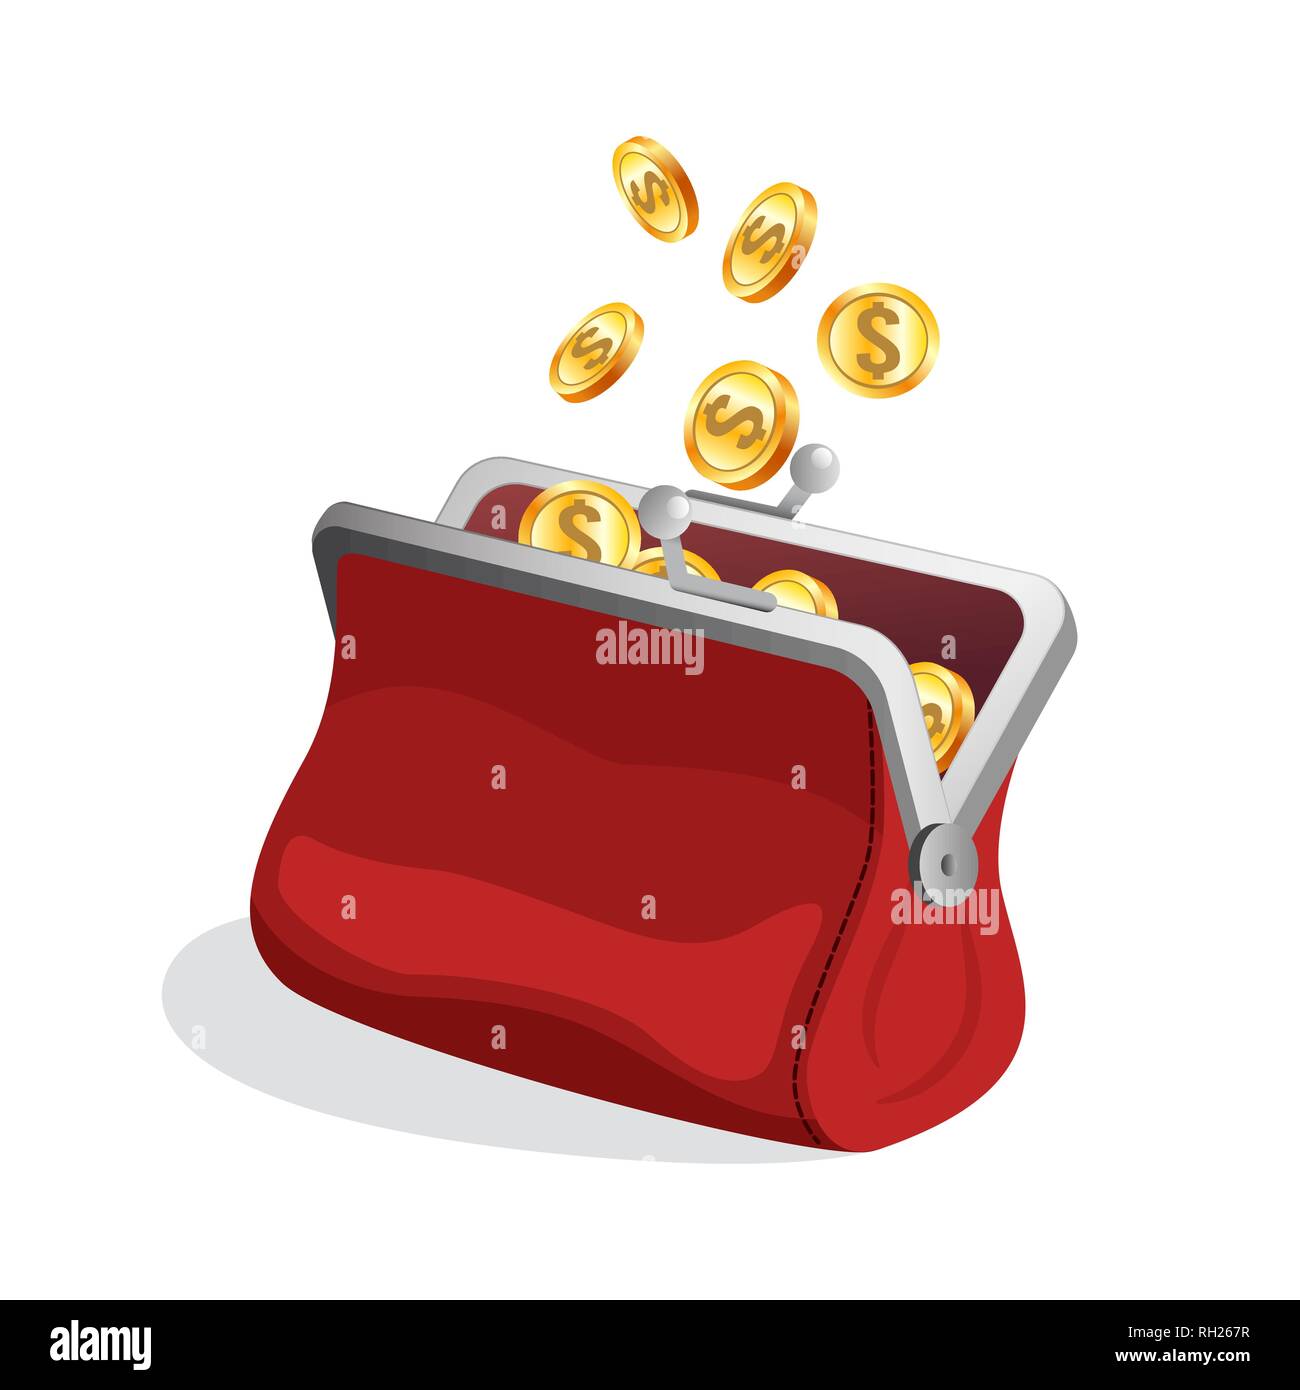 Opened red purse icon with bright gold coins inside Stock Vector